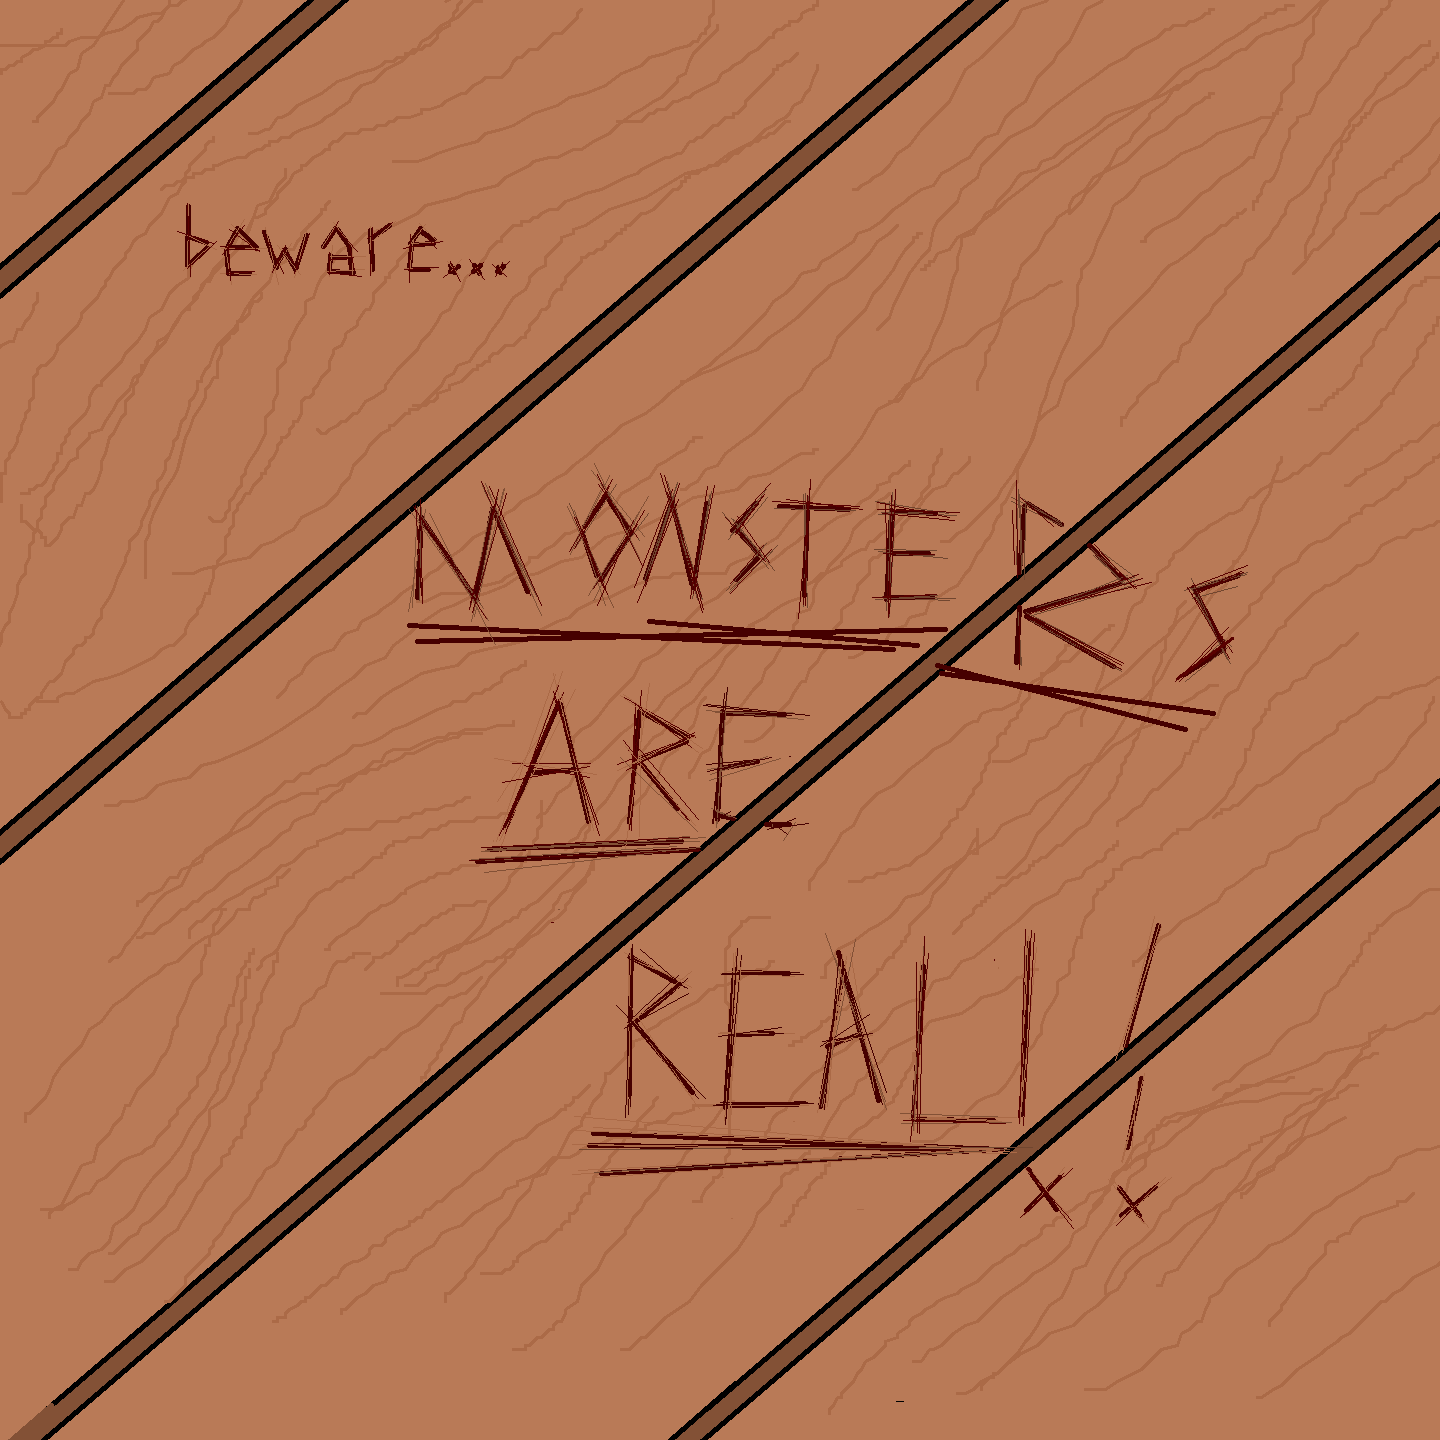 Episode 4 - Monsters Are Real